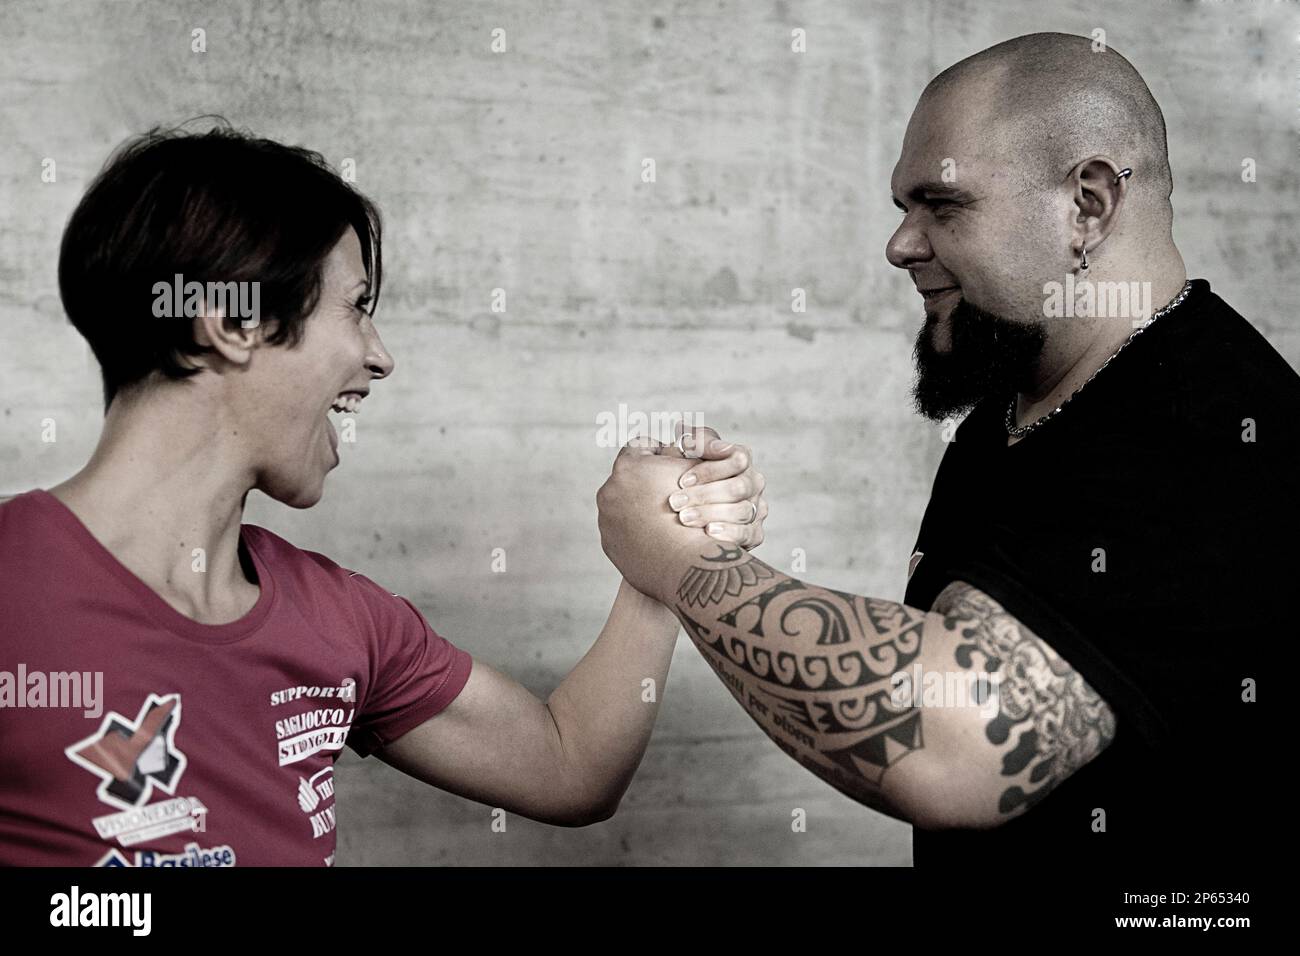 Switzerland, Canton Ticino, Bedano, Paolo Sagliocco Strongman with your girlfriend Stock Photo